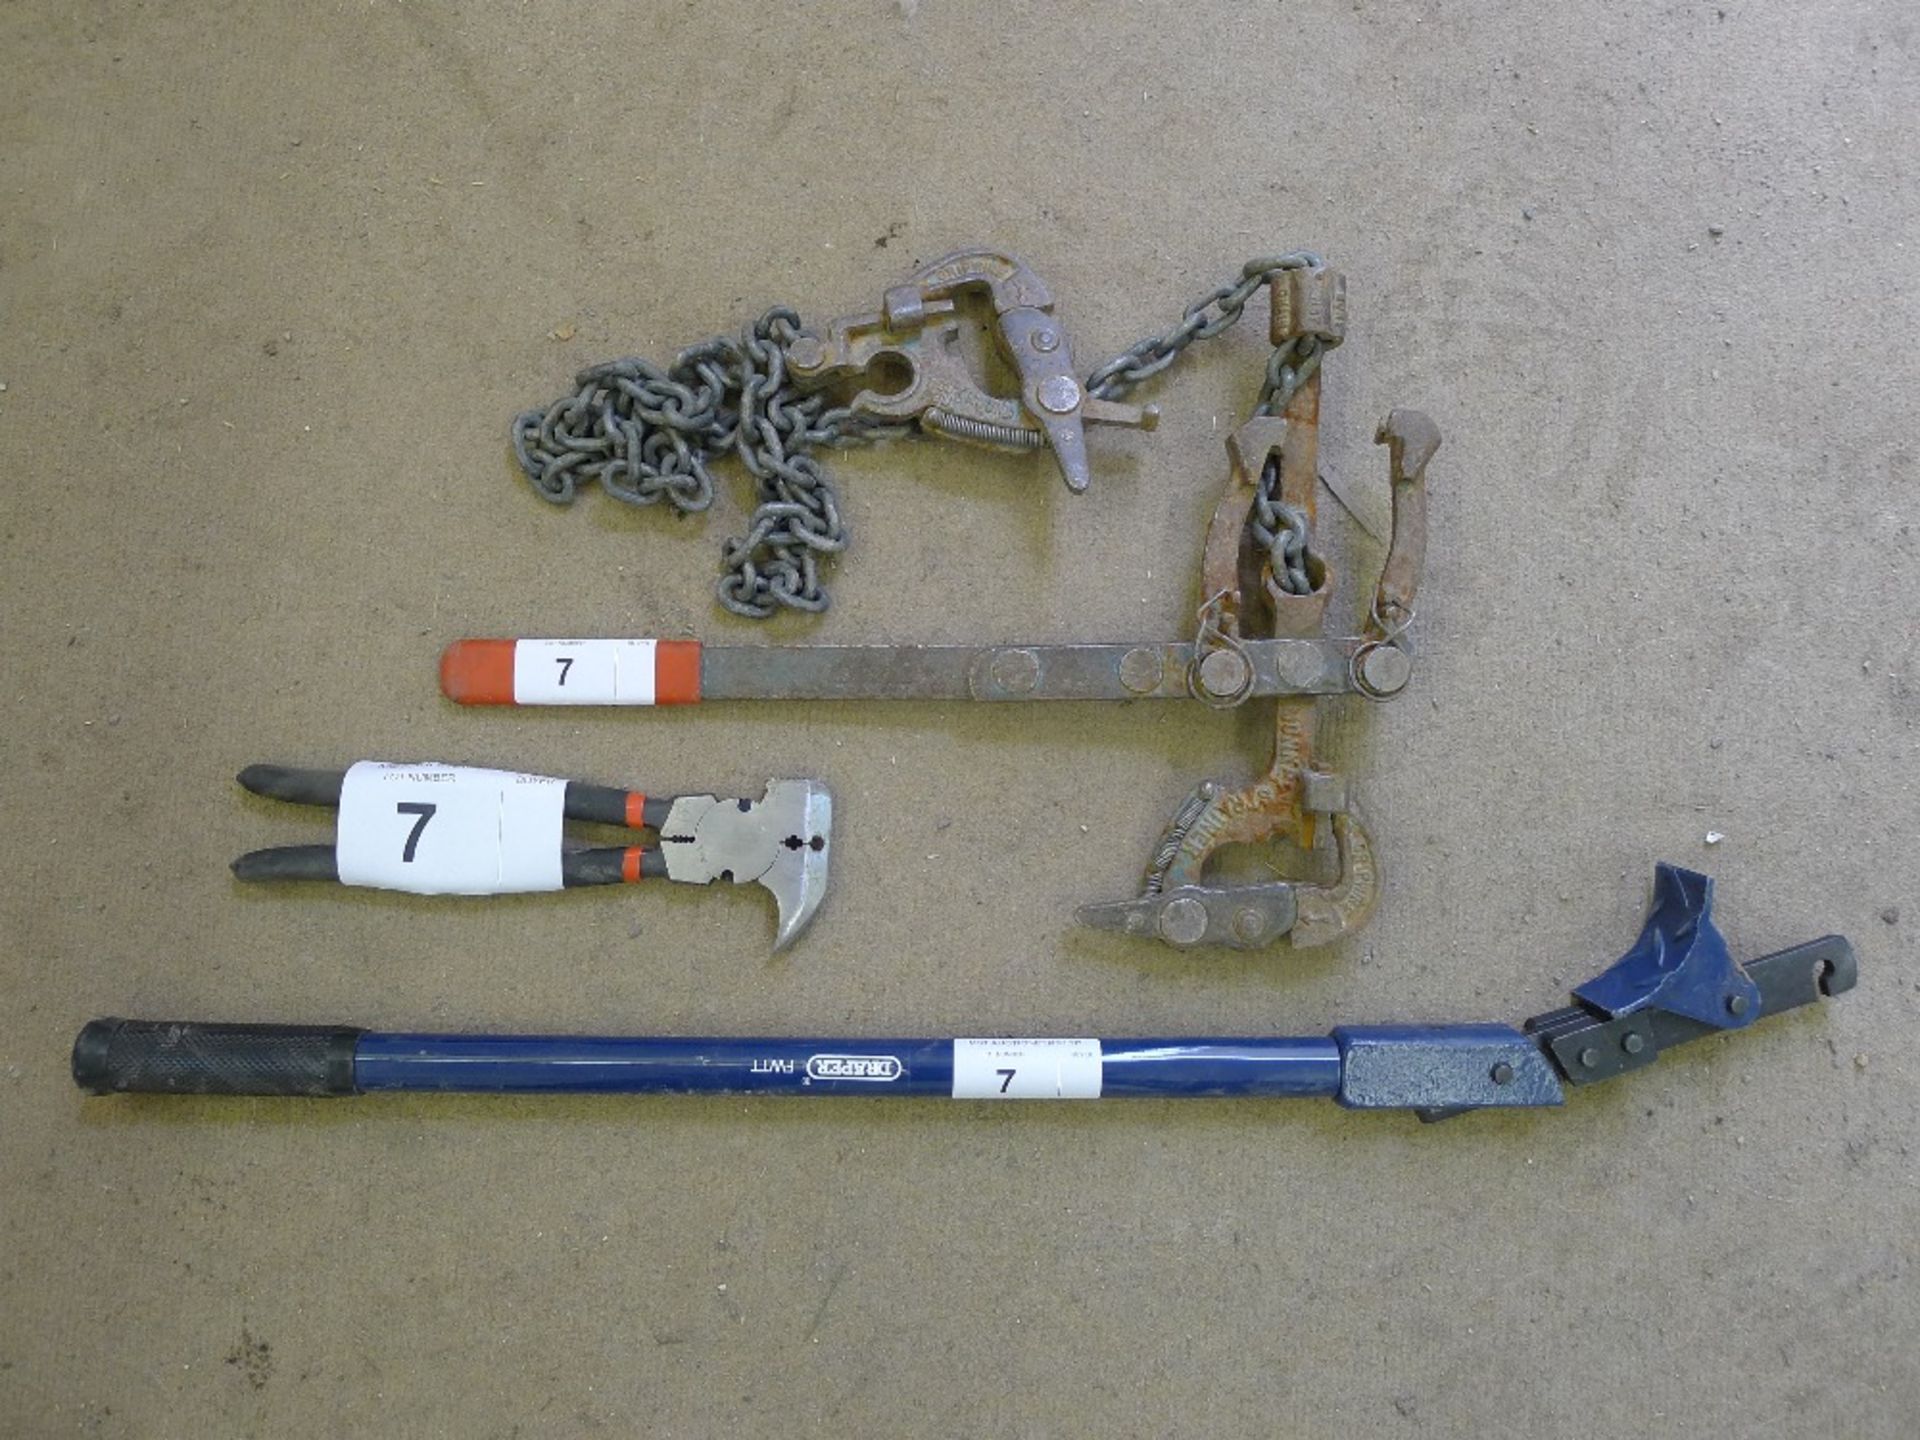 2 wire fencing tensioners & 1 other fencing tool